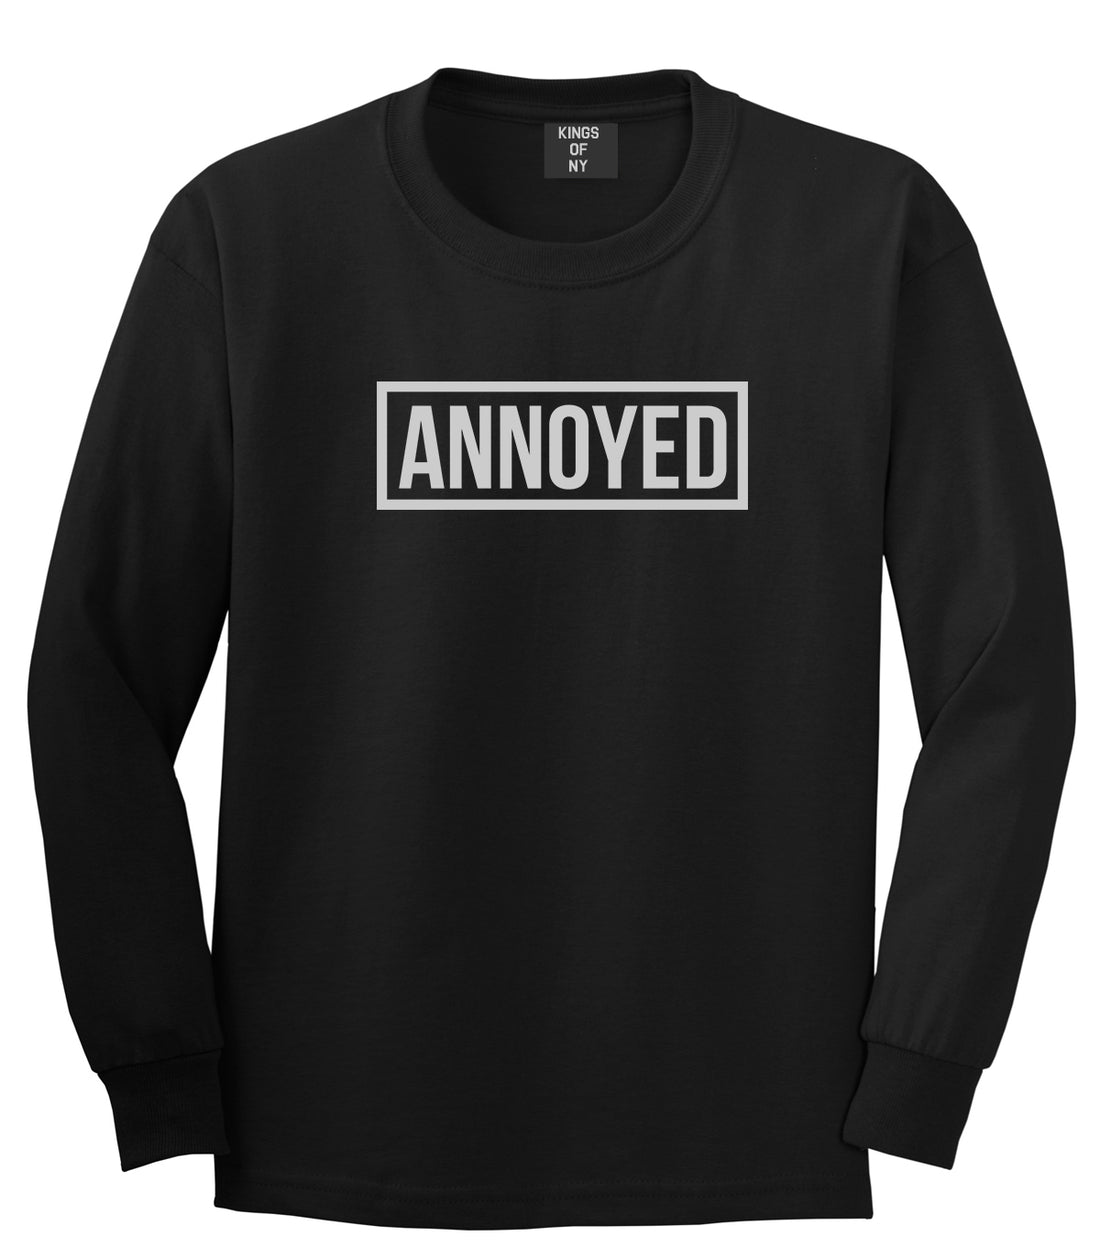 Annoyed Black Long Sleeve T-Shirt by Kings Of NY